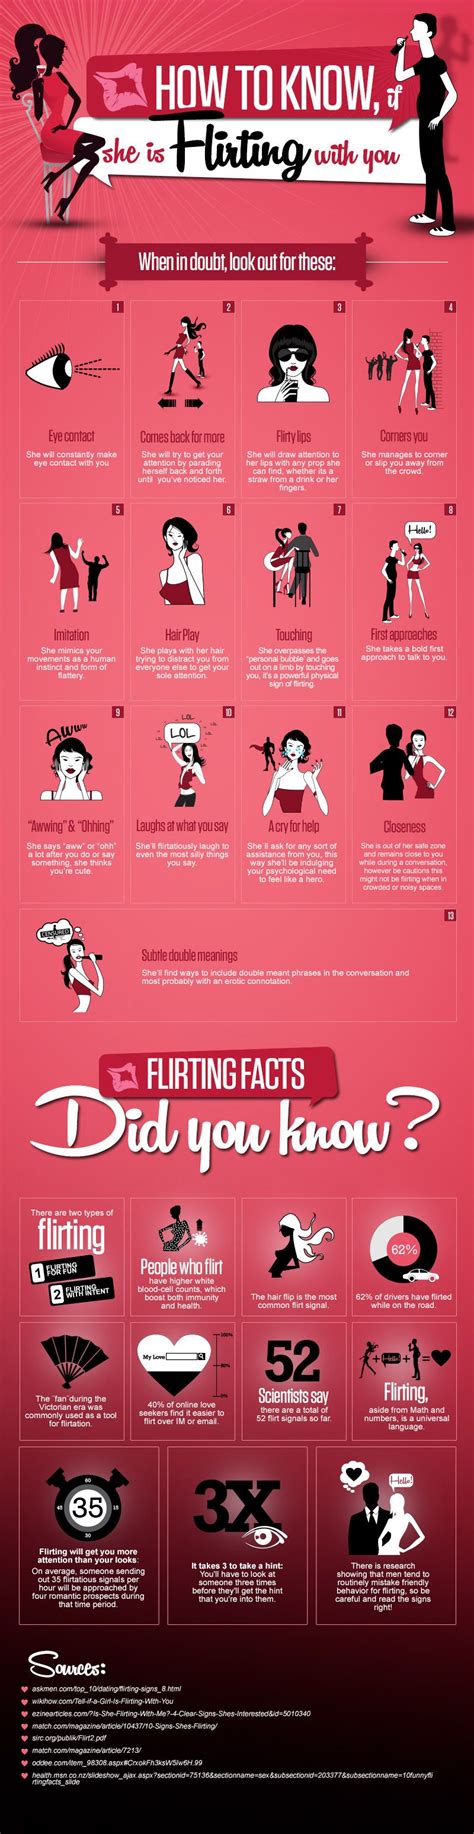 it can be a difficult situation to figure out the signs if a girl really flirting with you